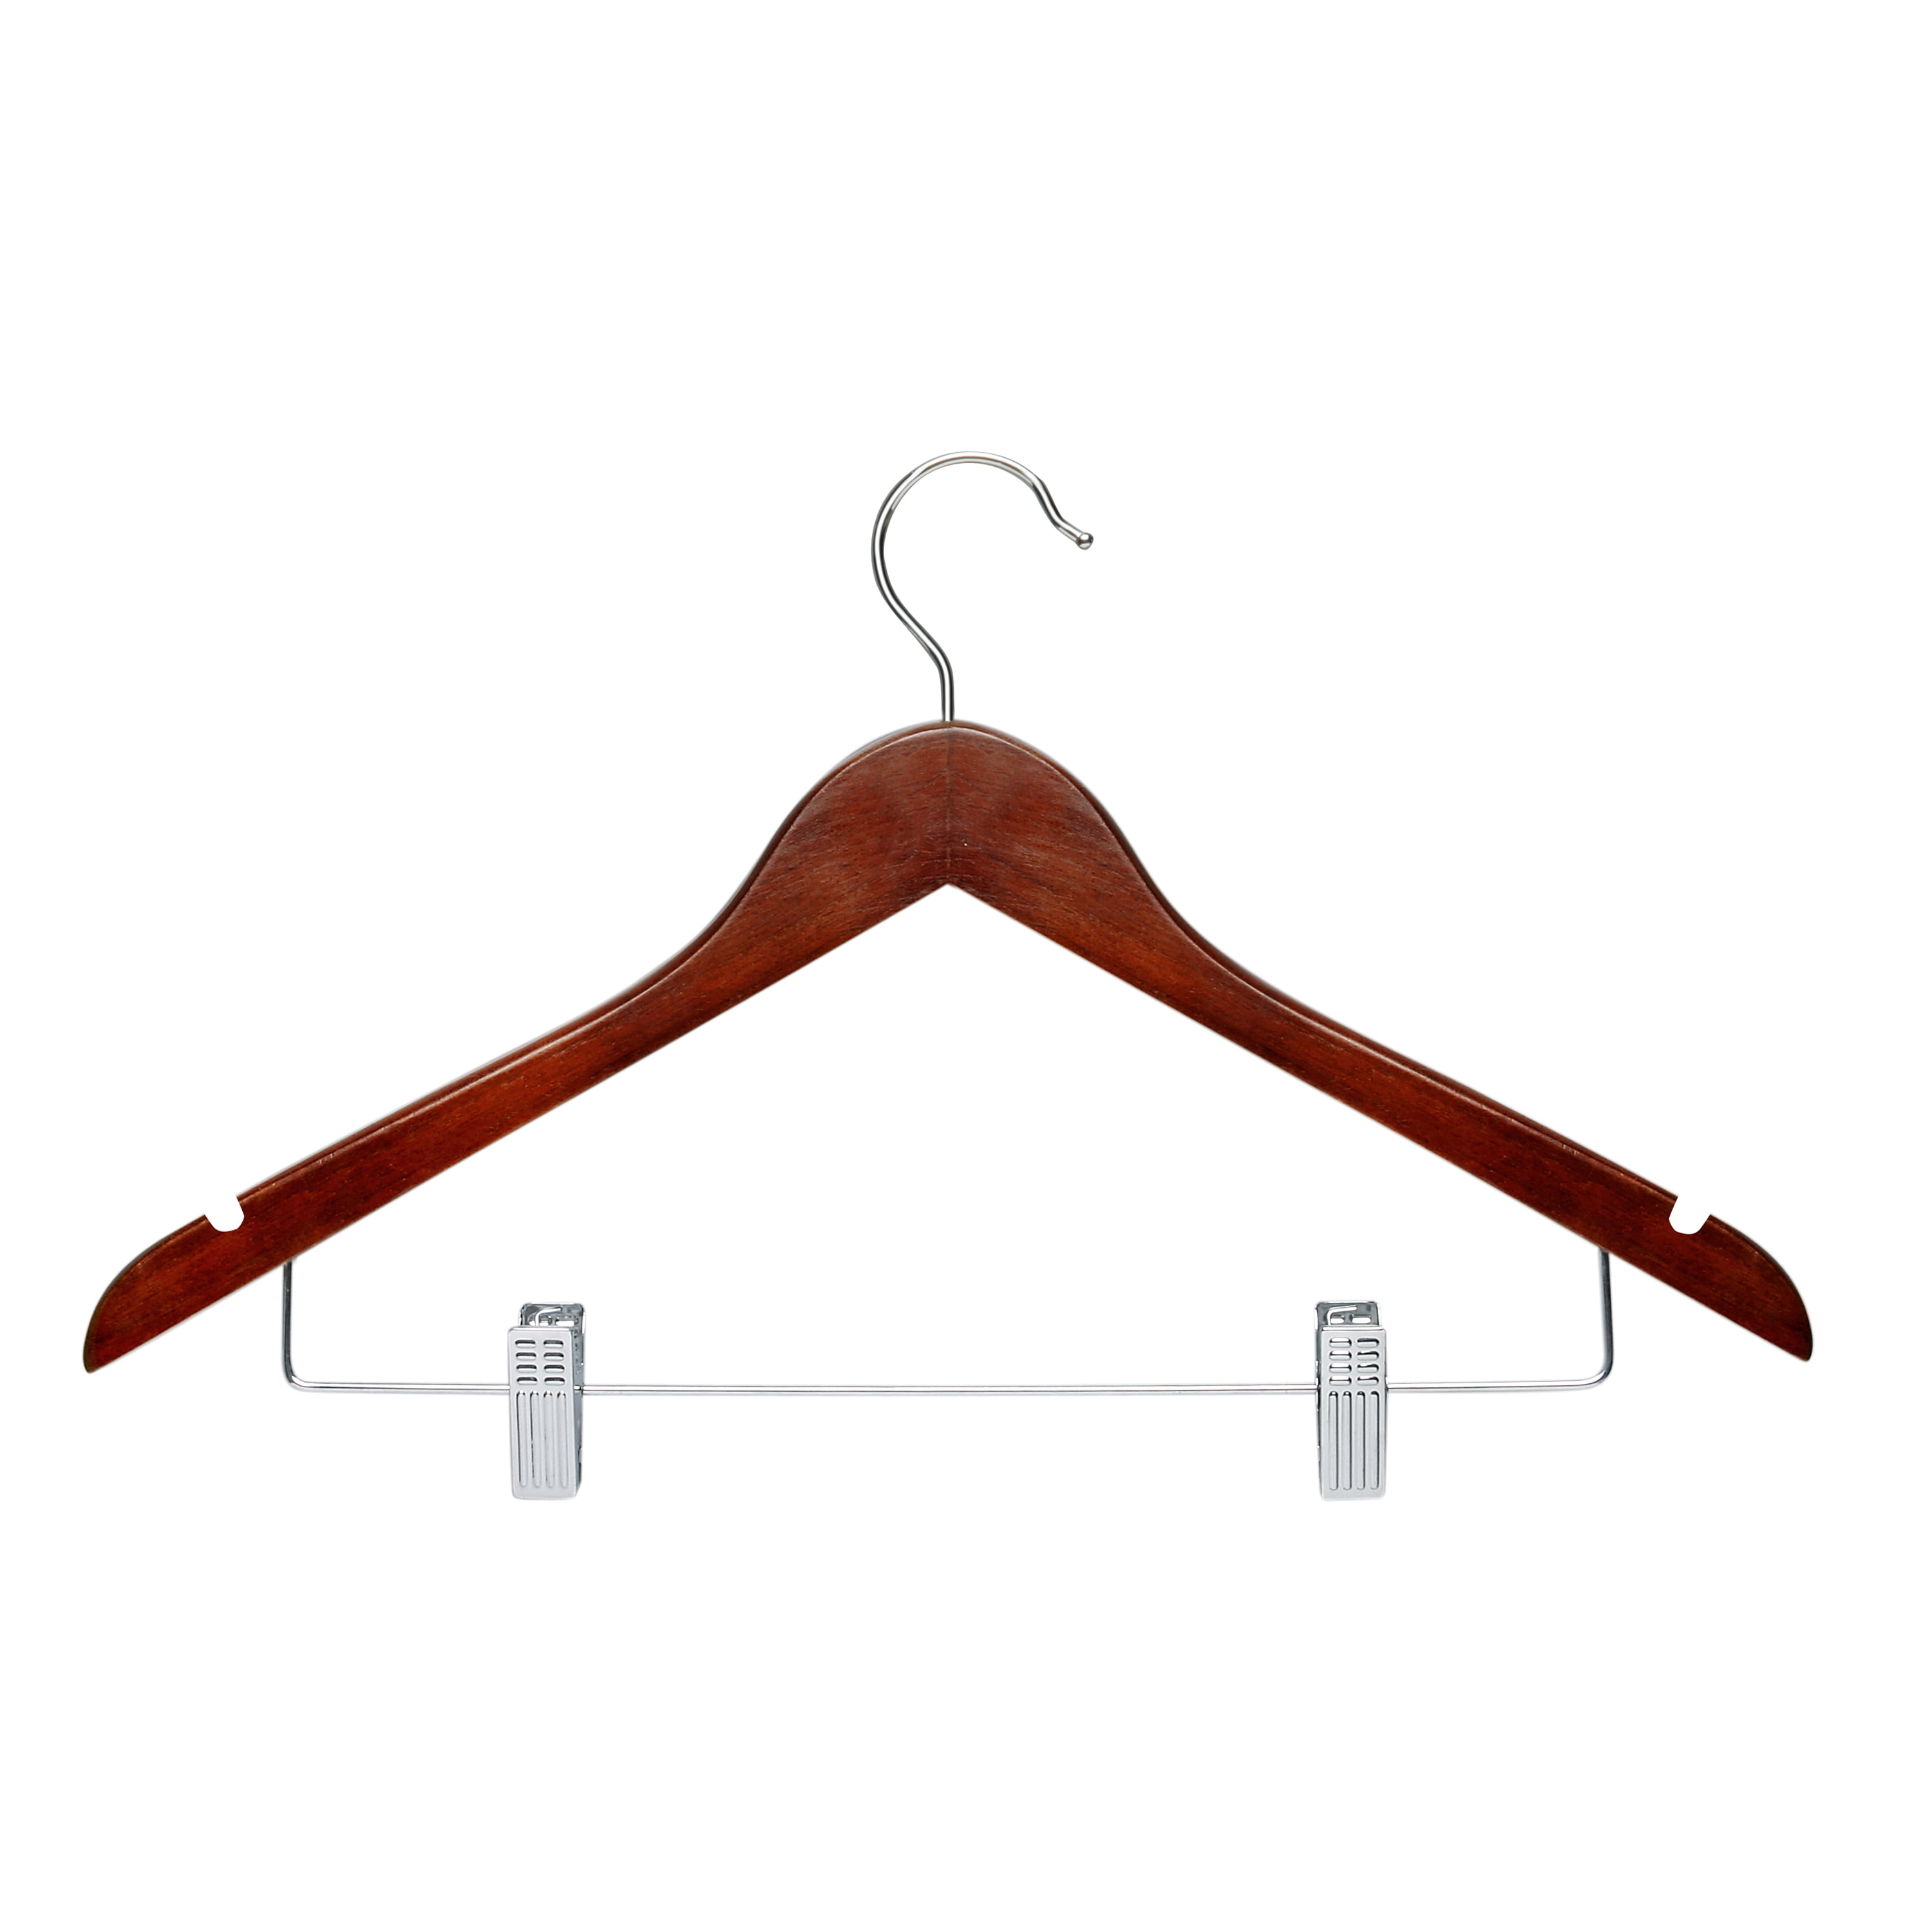 Suit Hangers Amber Home Premium Walnut Color Wood Bridal Dress Hangers Pants Hangers with Non-Slip Bar Smooth Finish- Well Cut Notches 10 Pack Shirt Coat Hangers 